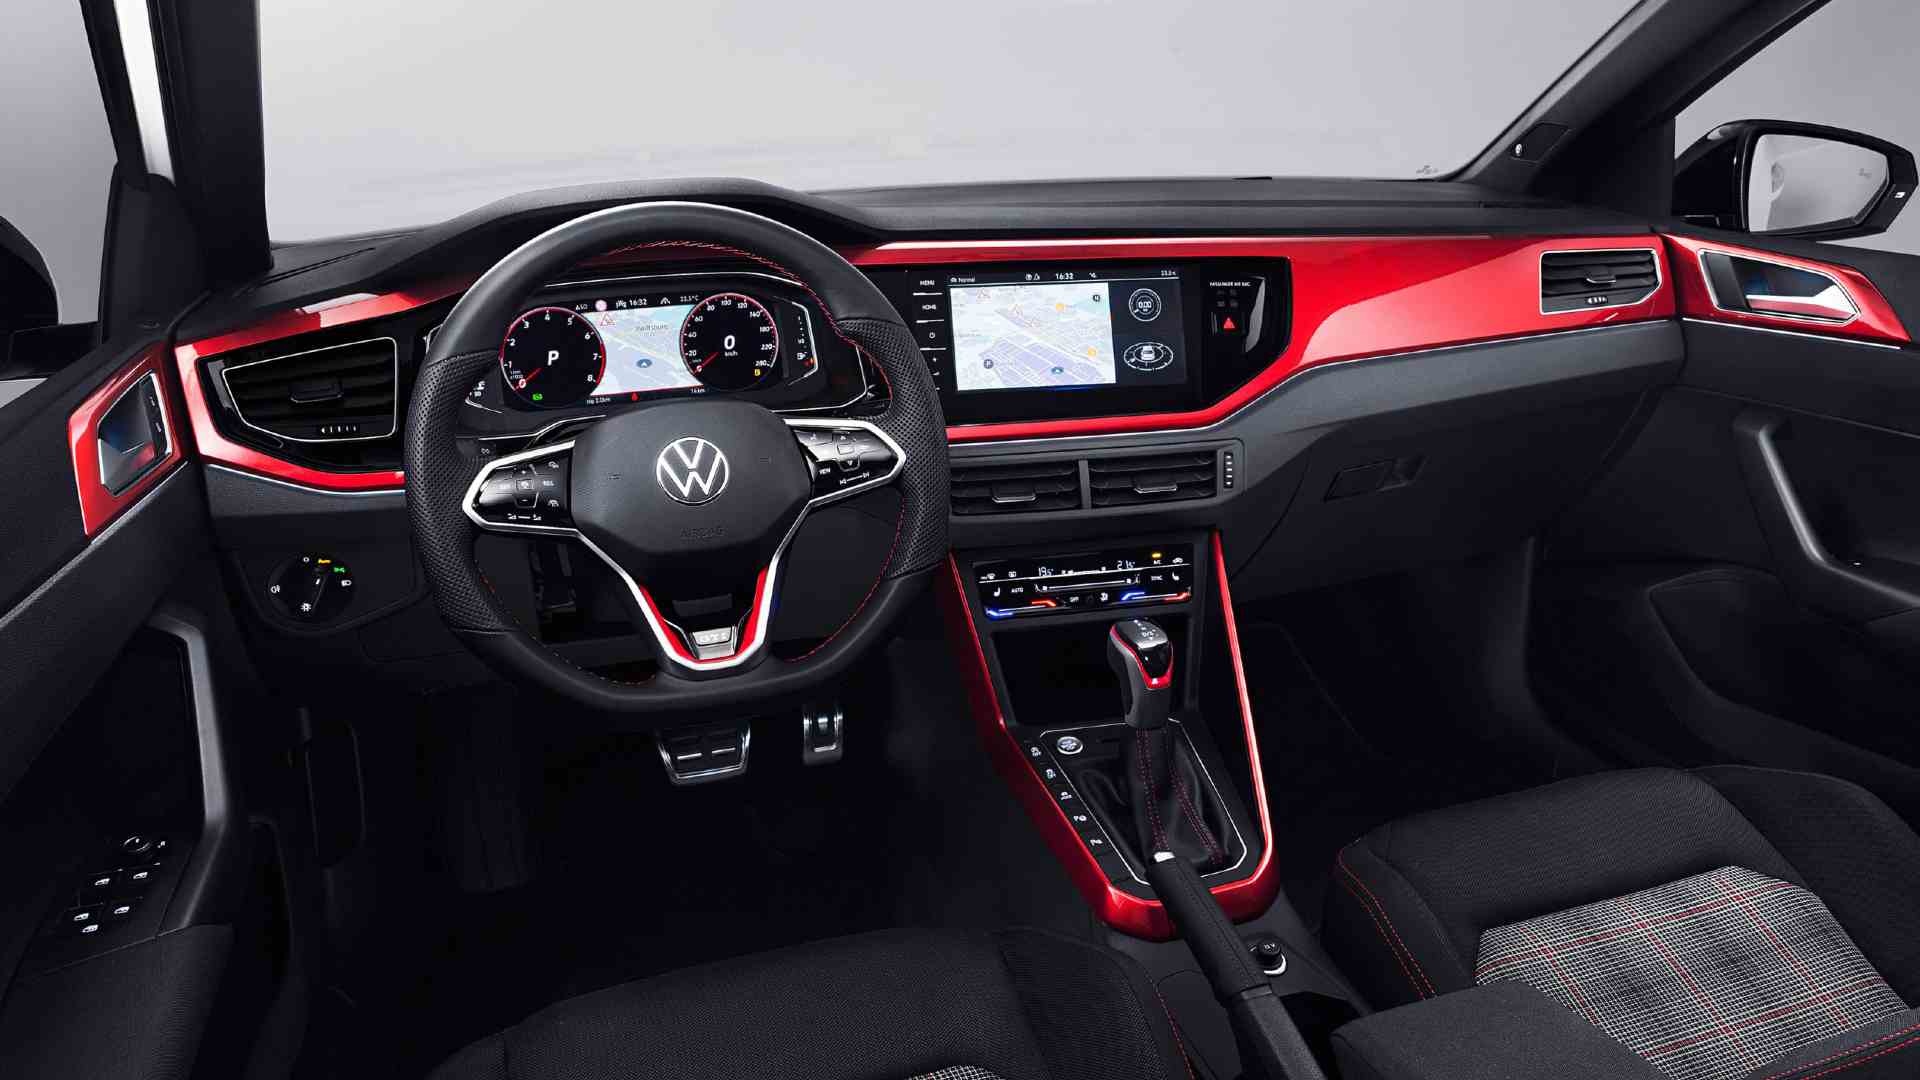 Volkswagen Polo GTI facelift makes world premiere, gets 207 hp engine and  7-speed DSG